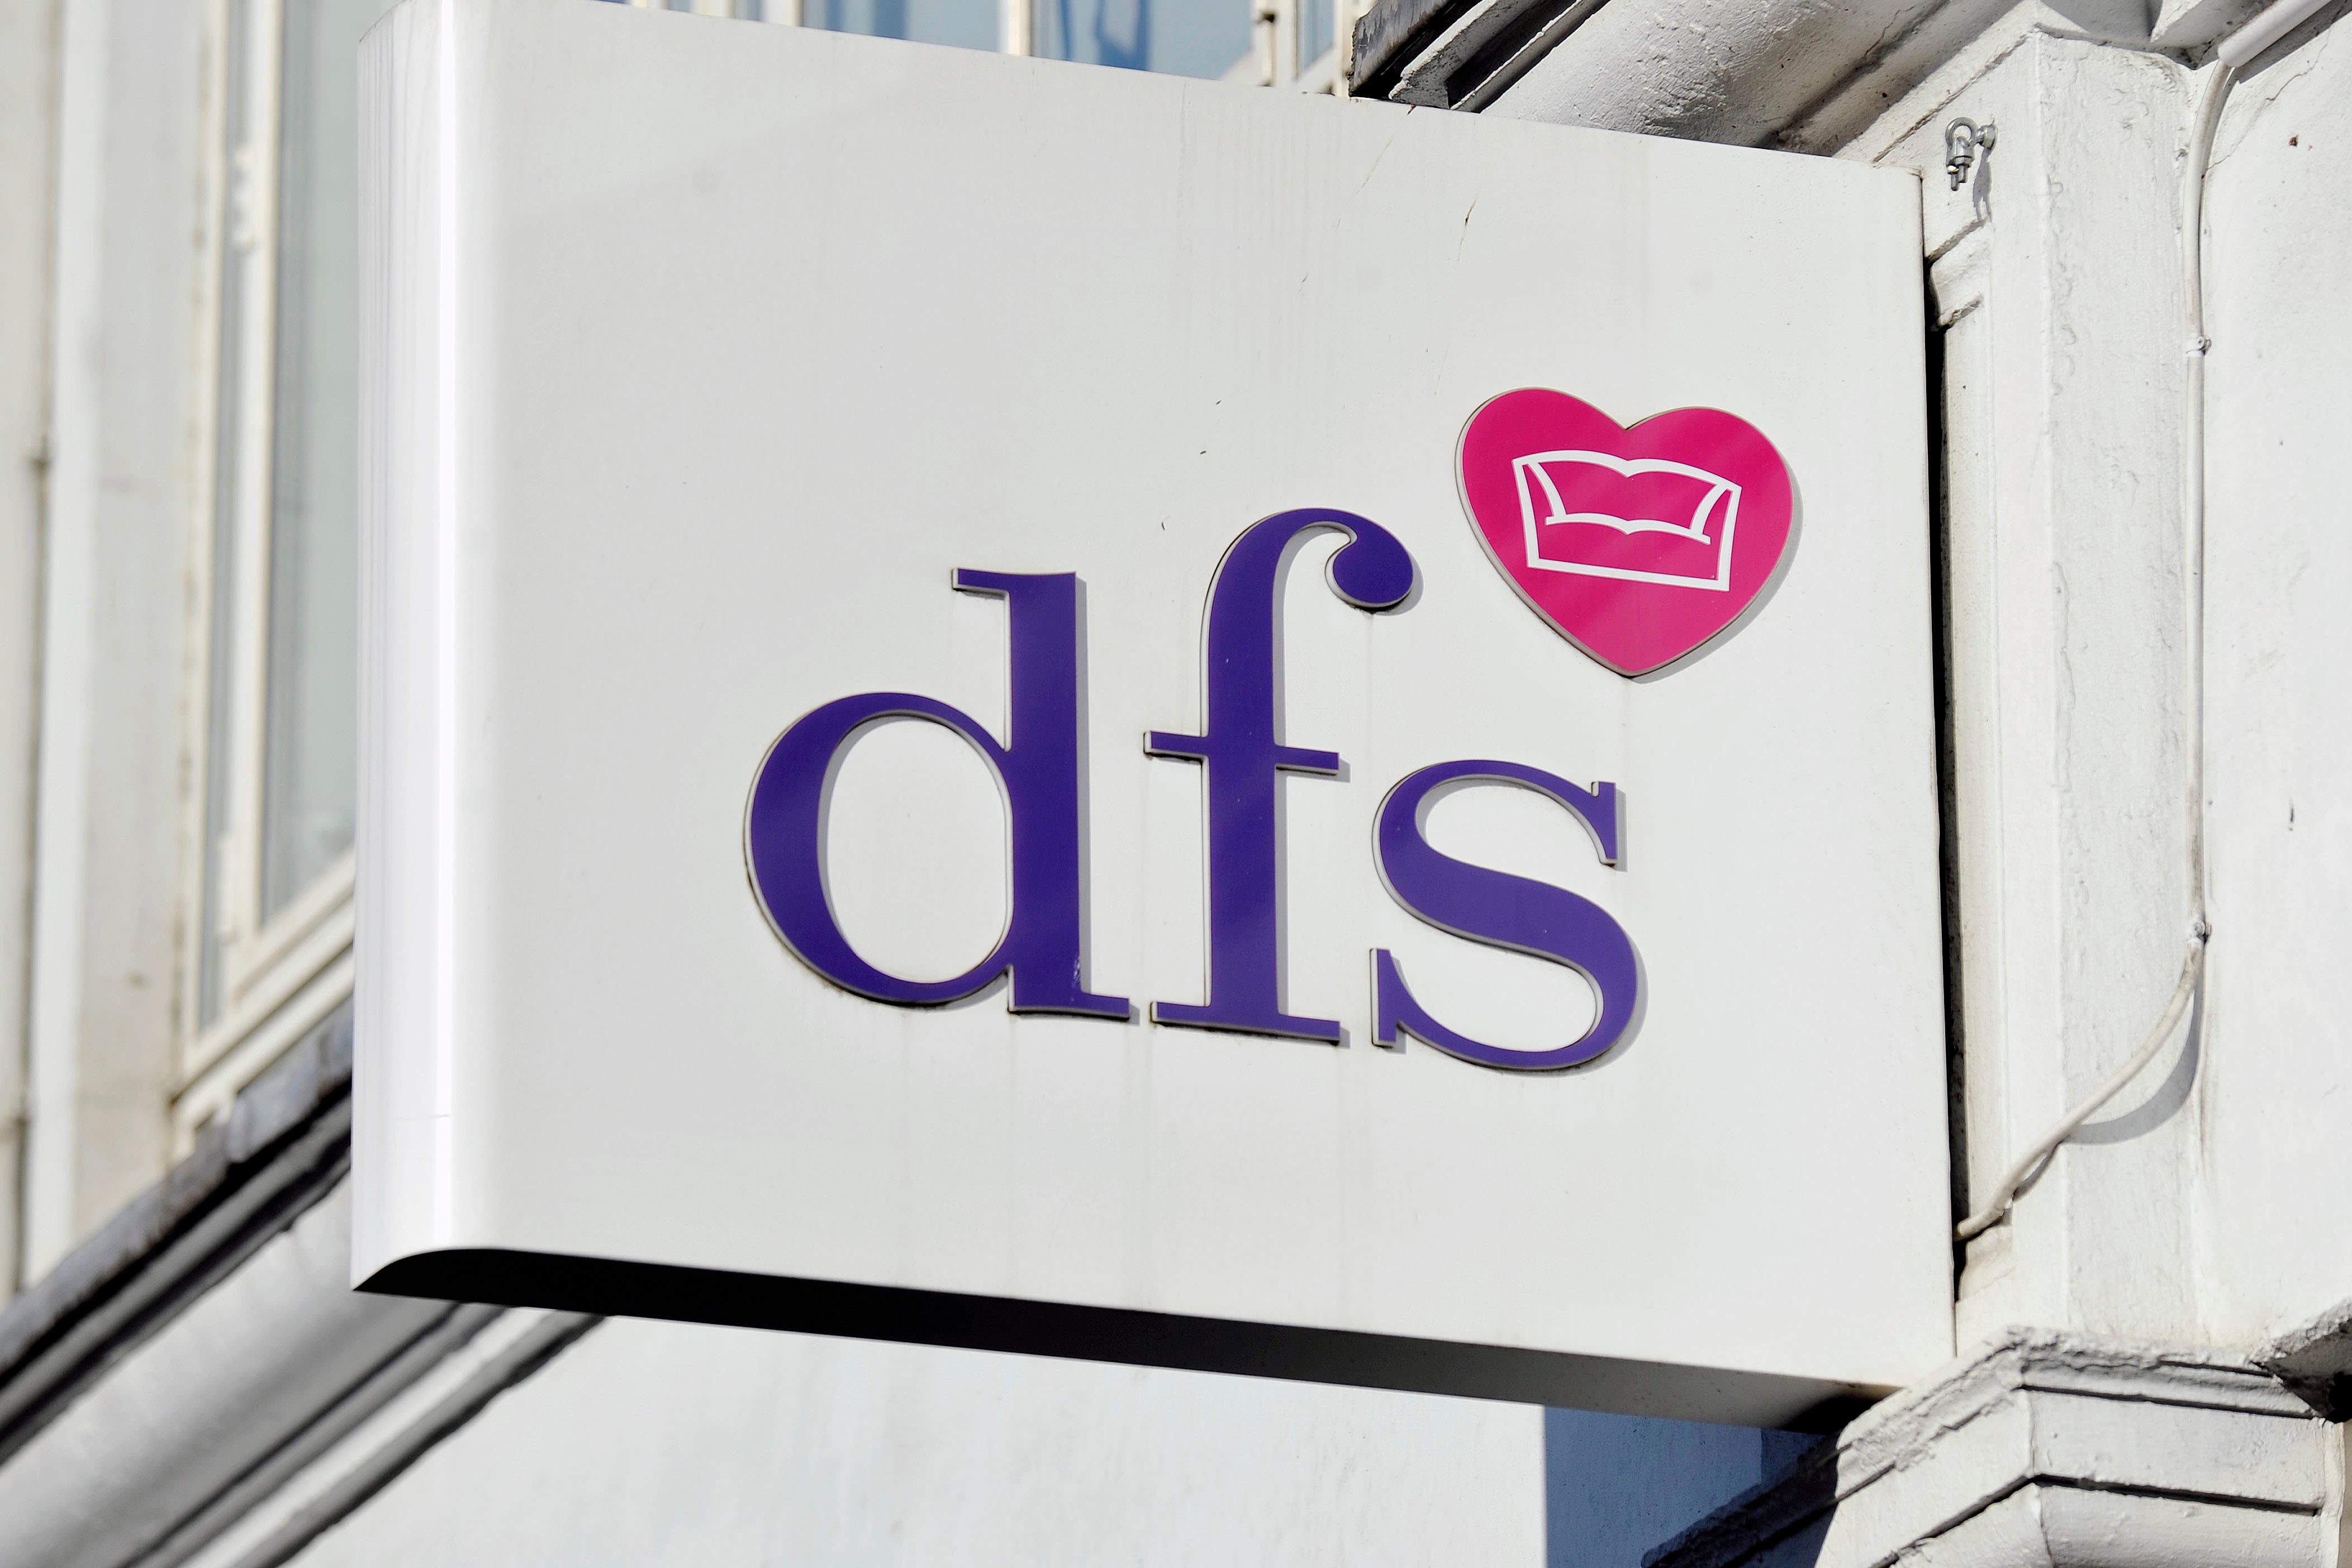 DFS continues to experience difficult environment in Asia